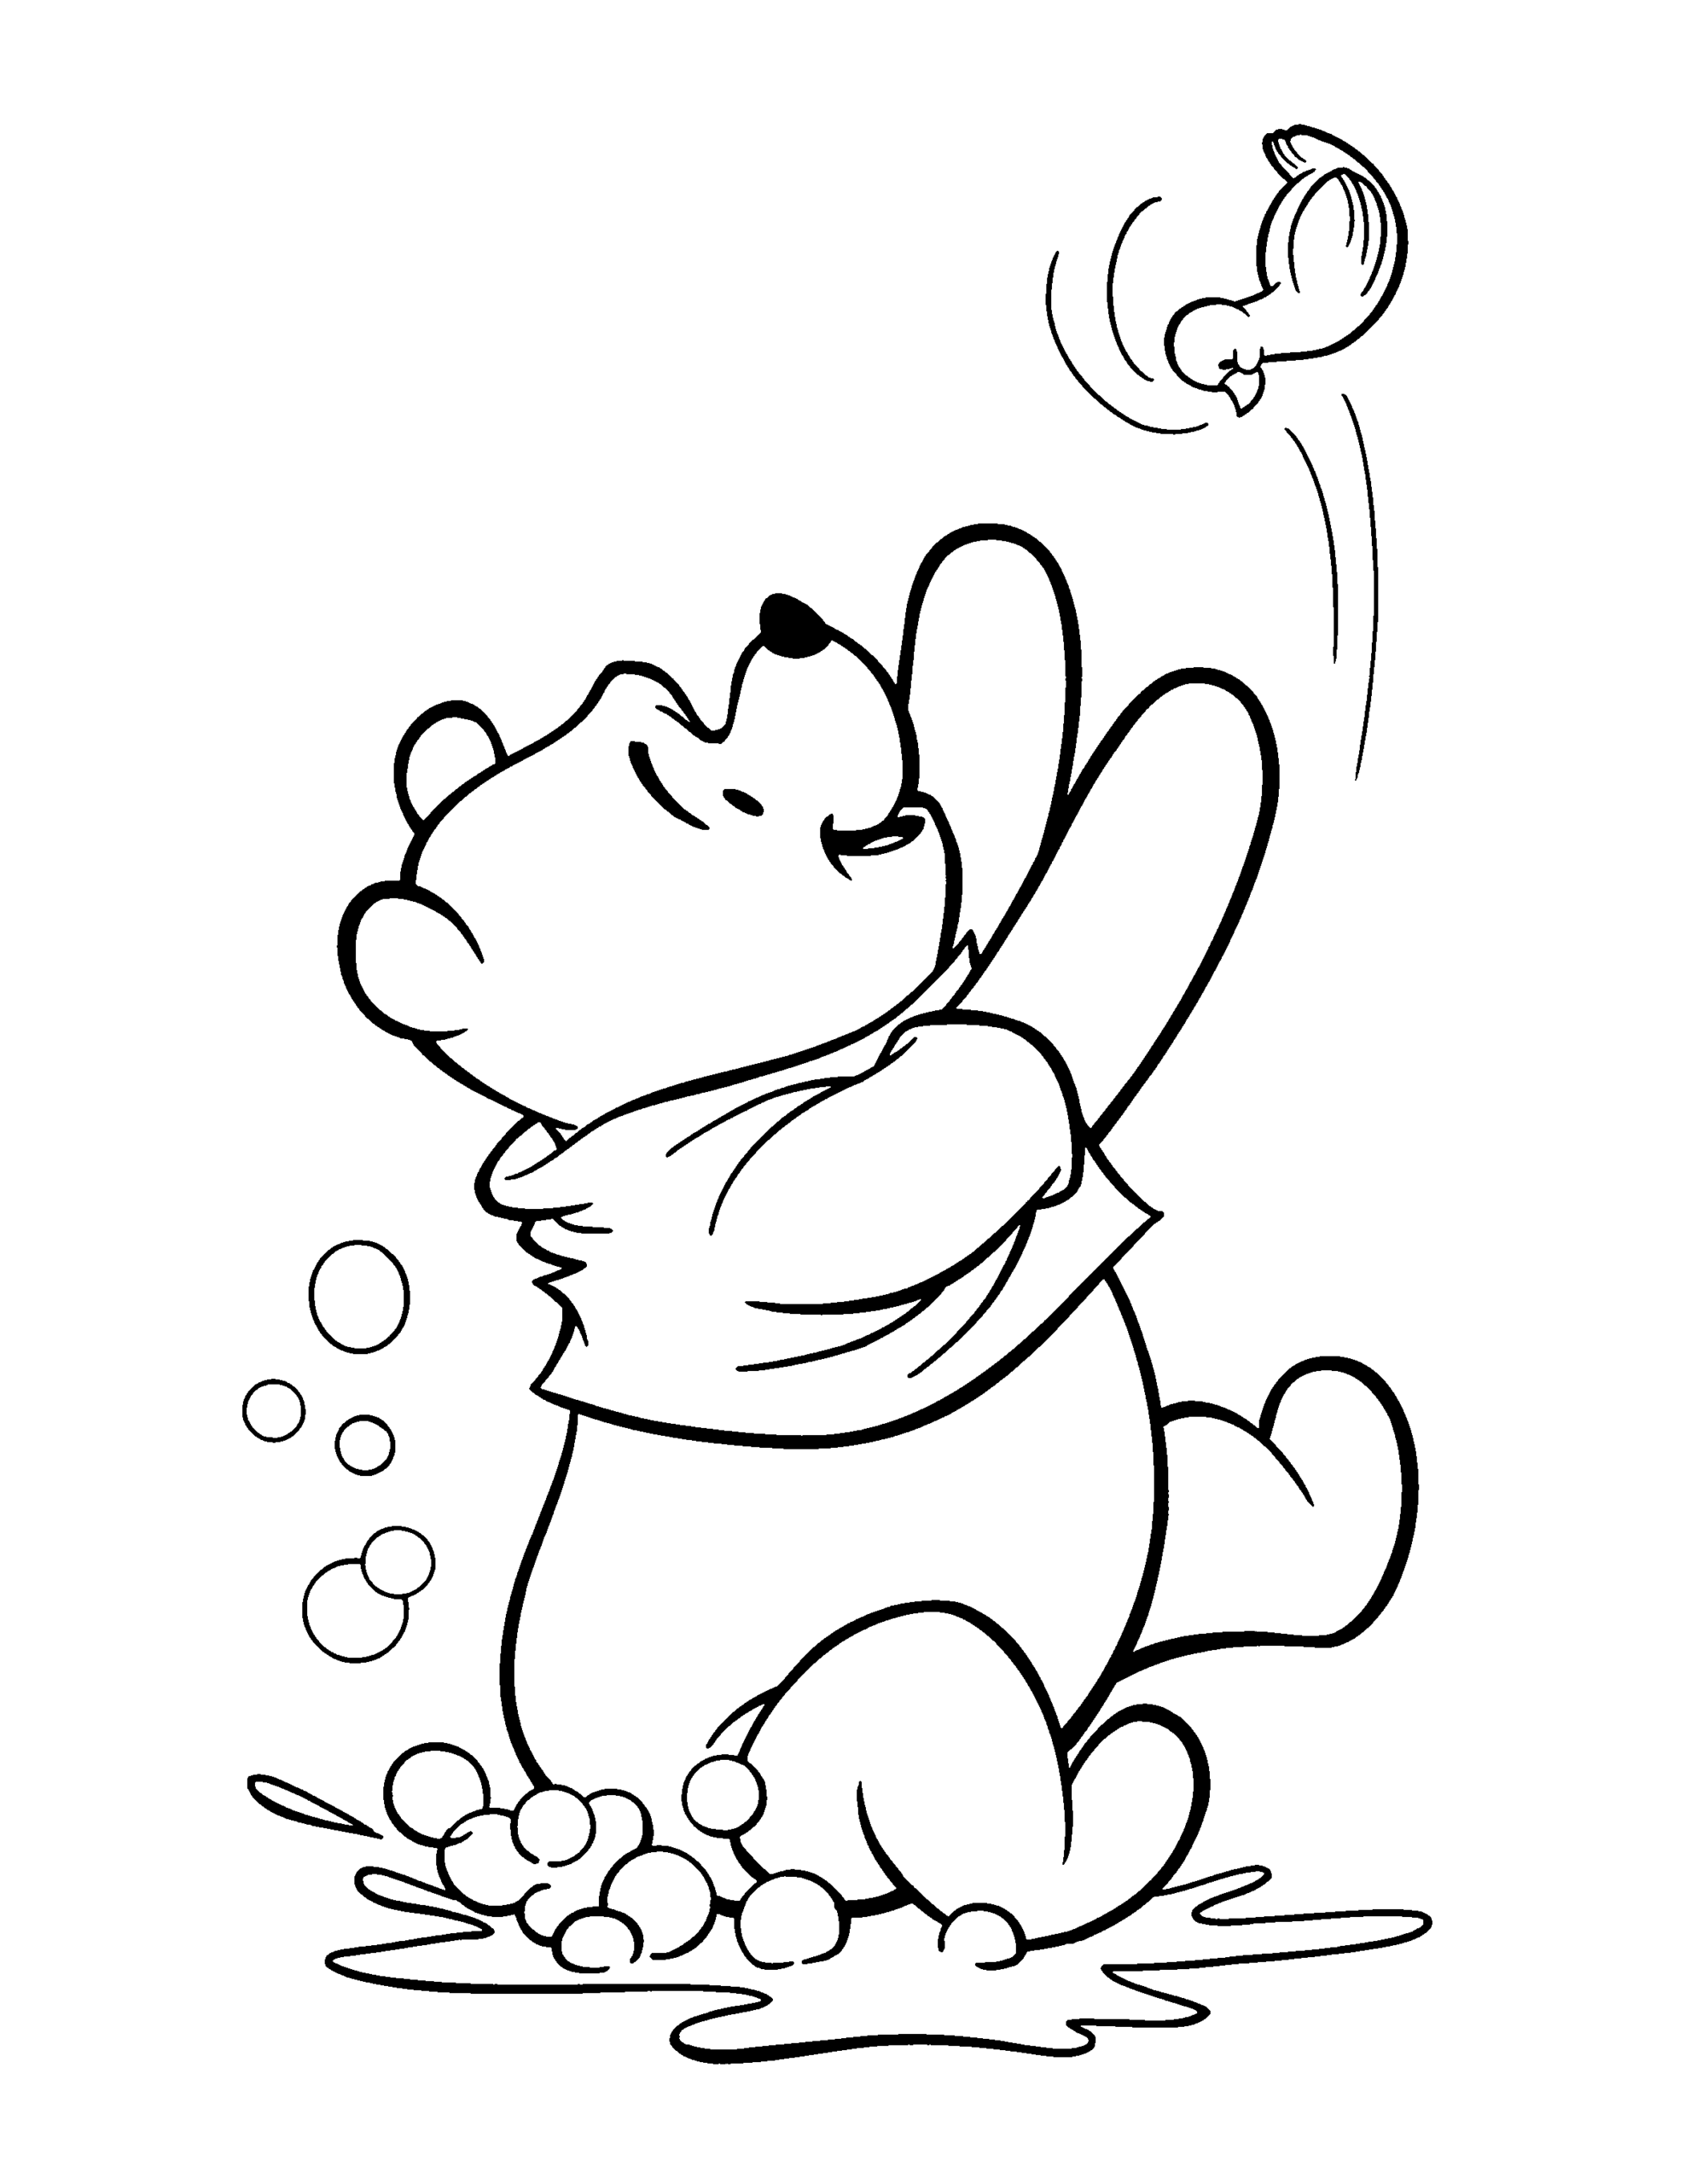 Winnie the Pooh Coloring Pages Cartoons winnie the pooh 102 Printable 2020 7081 Coloring4free